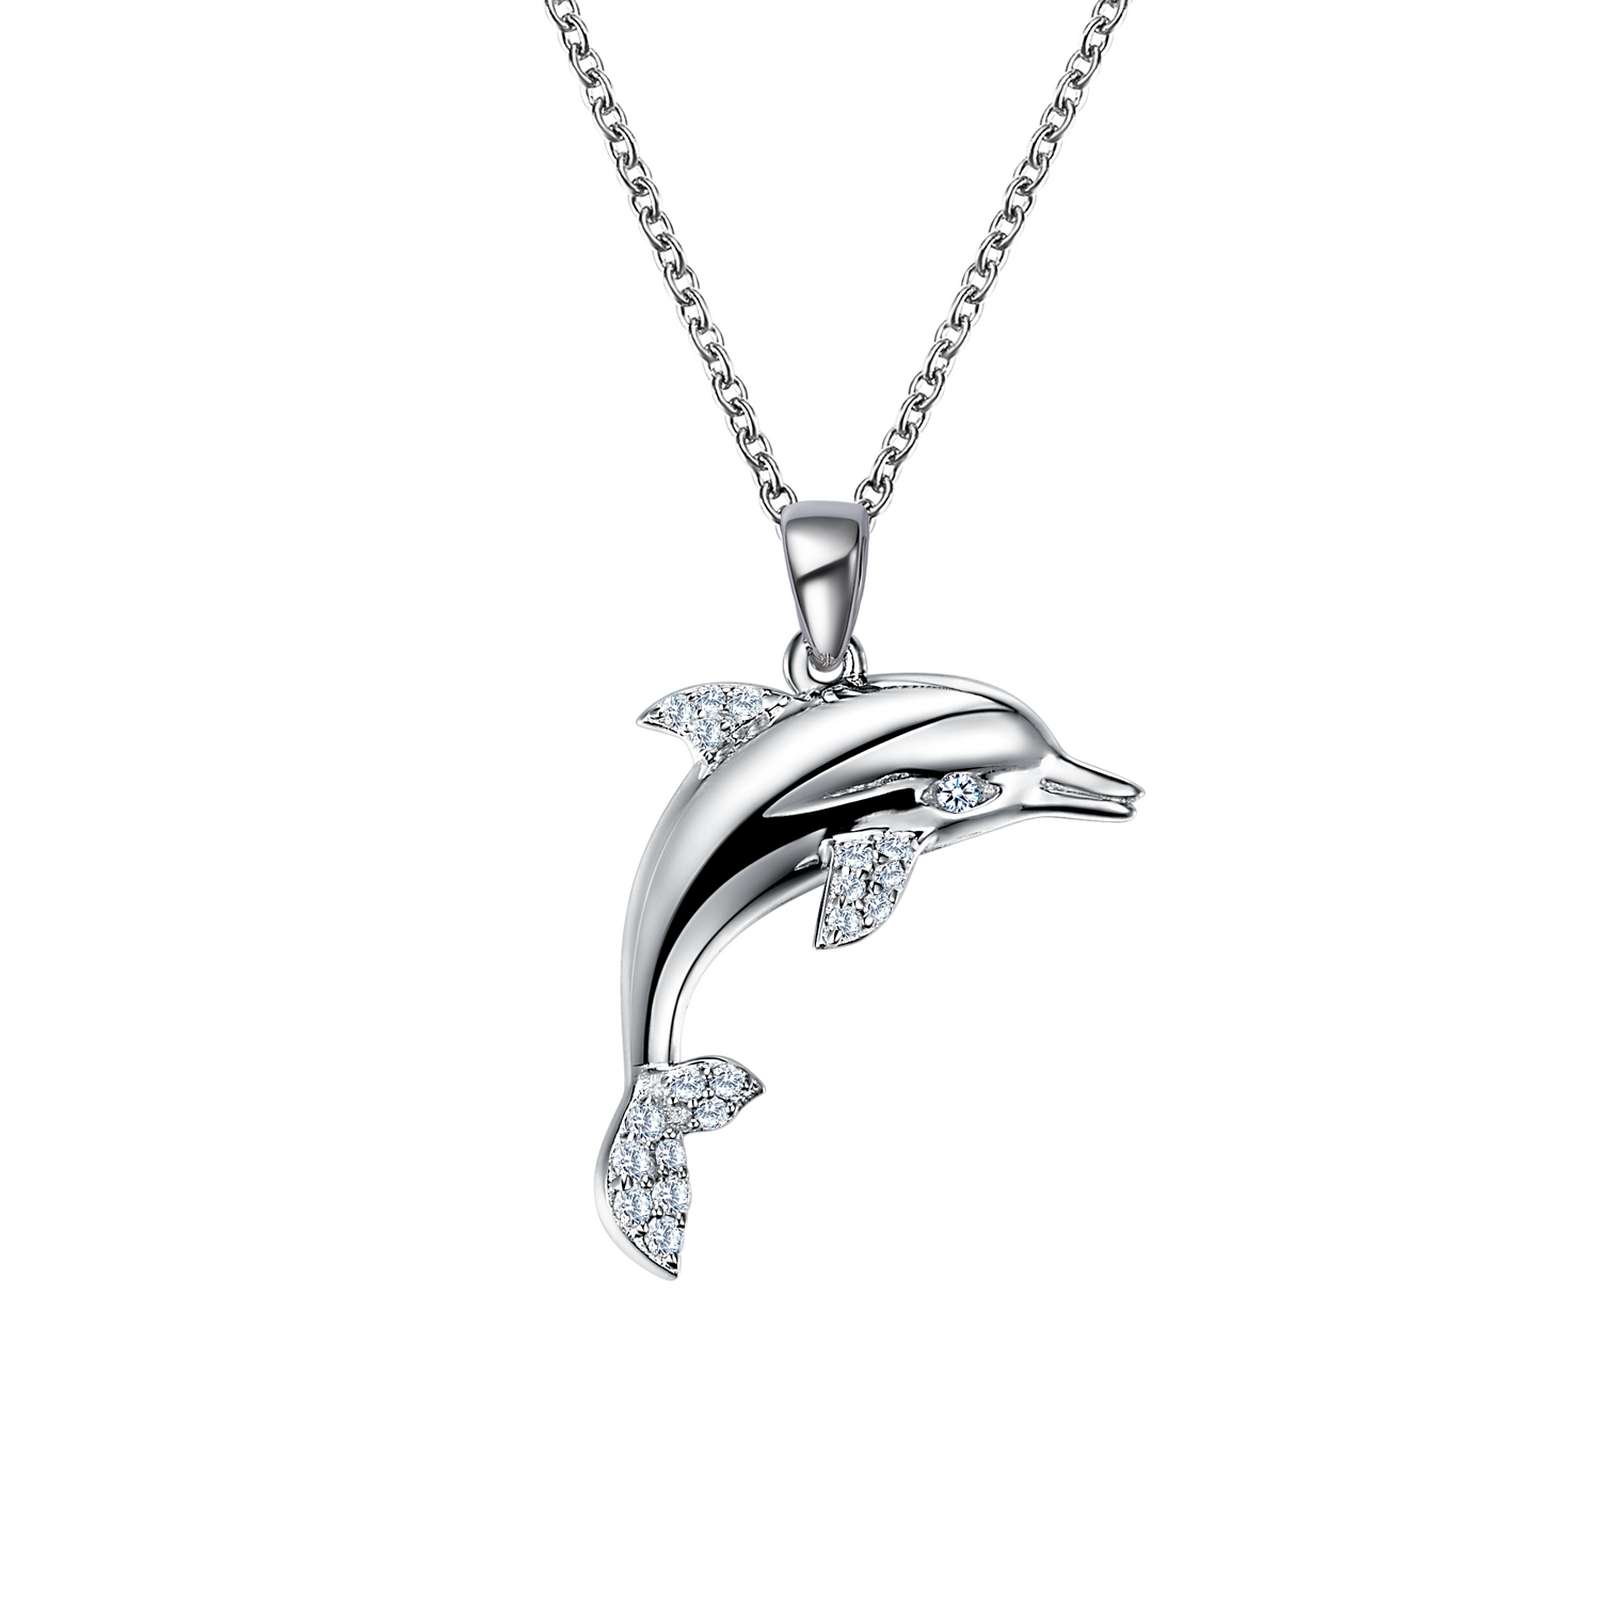 Leaping Dolphin Necklace Griner Jewelry Co. Moultrie, GA